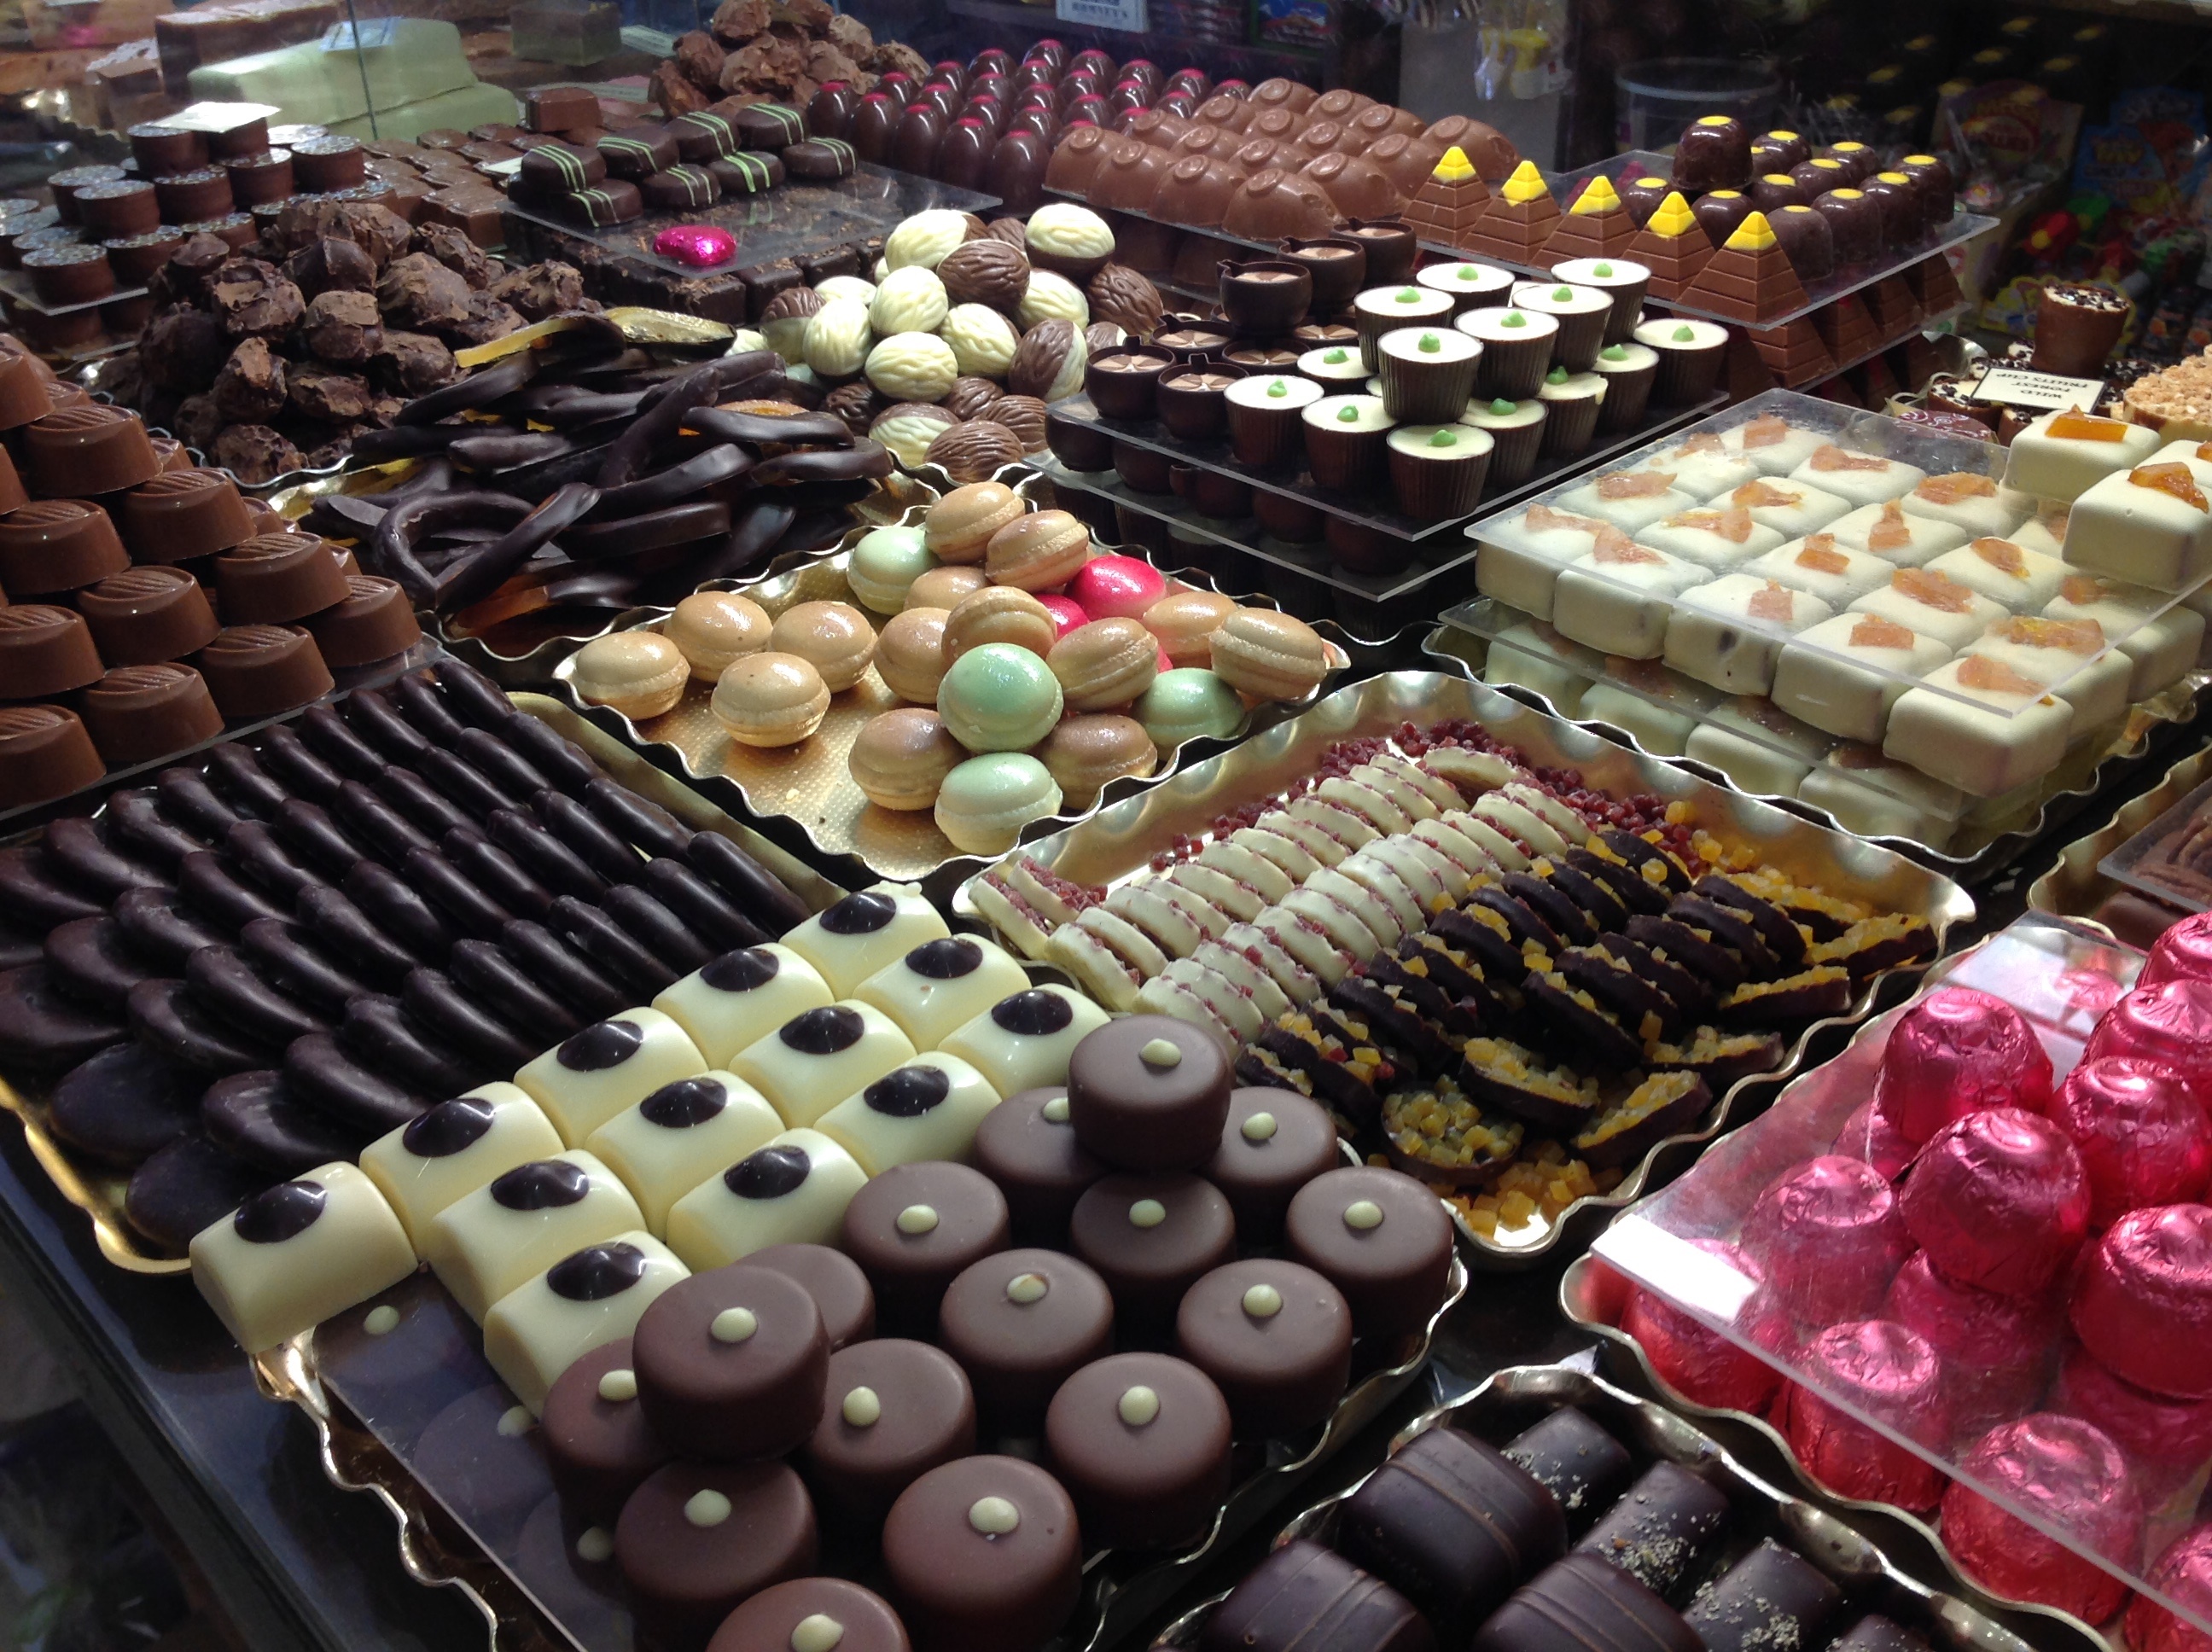 Find your chocolates here